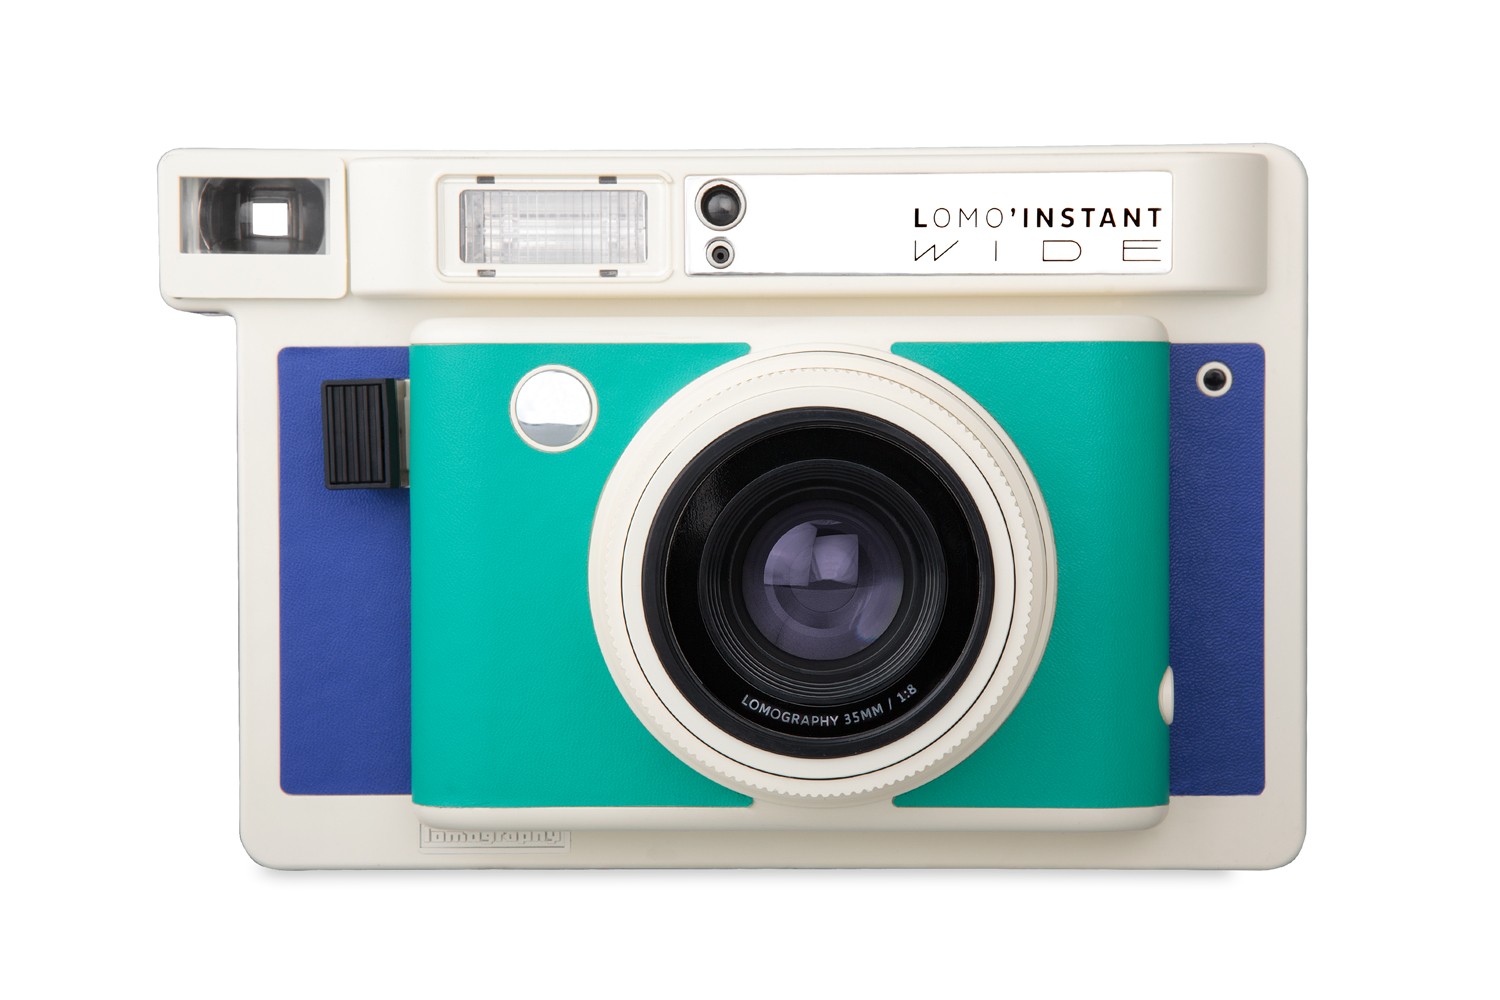 SNAPPP-Lomo'instant wide-front